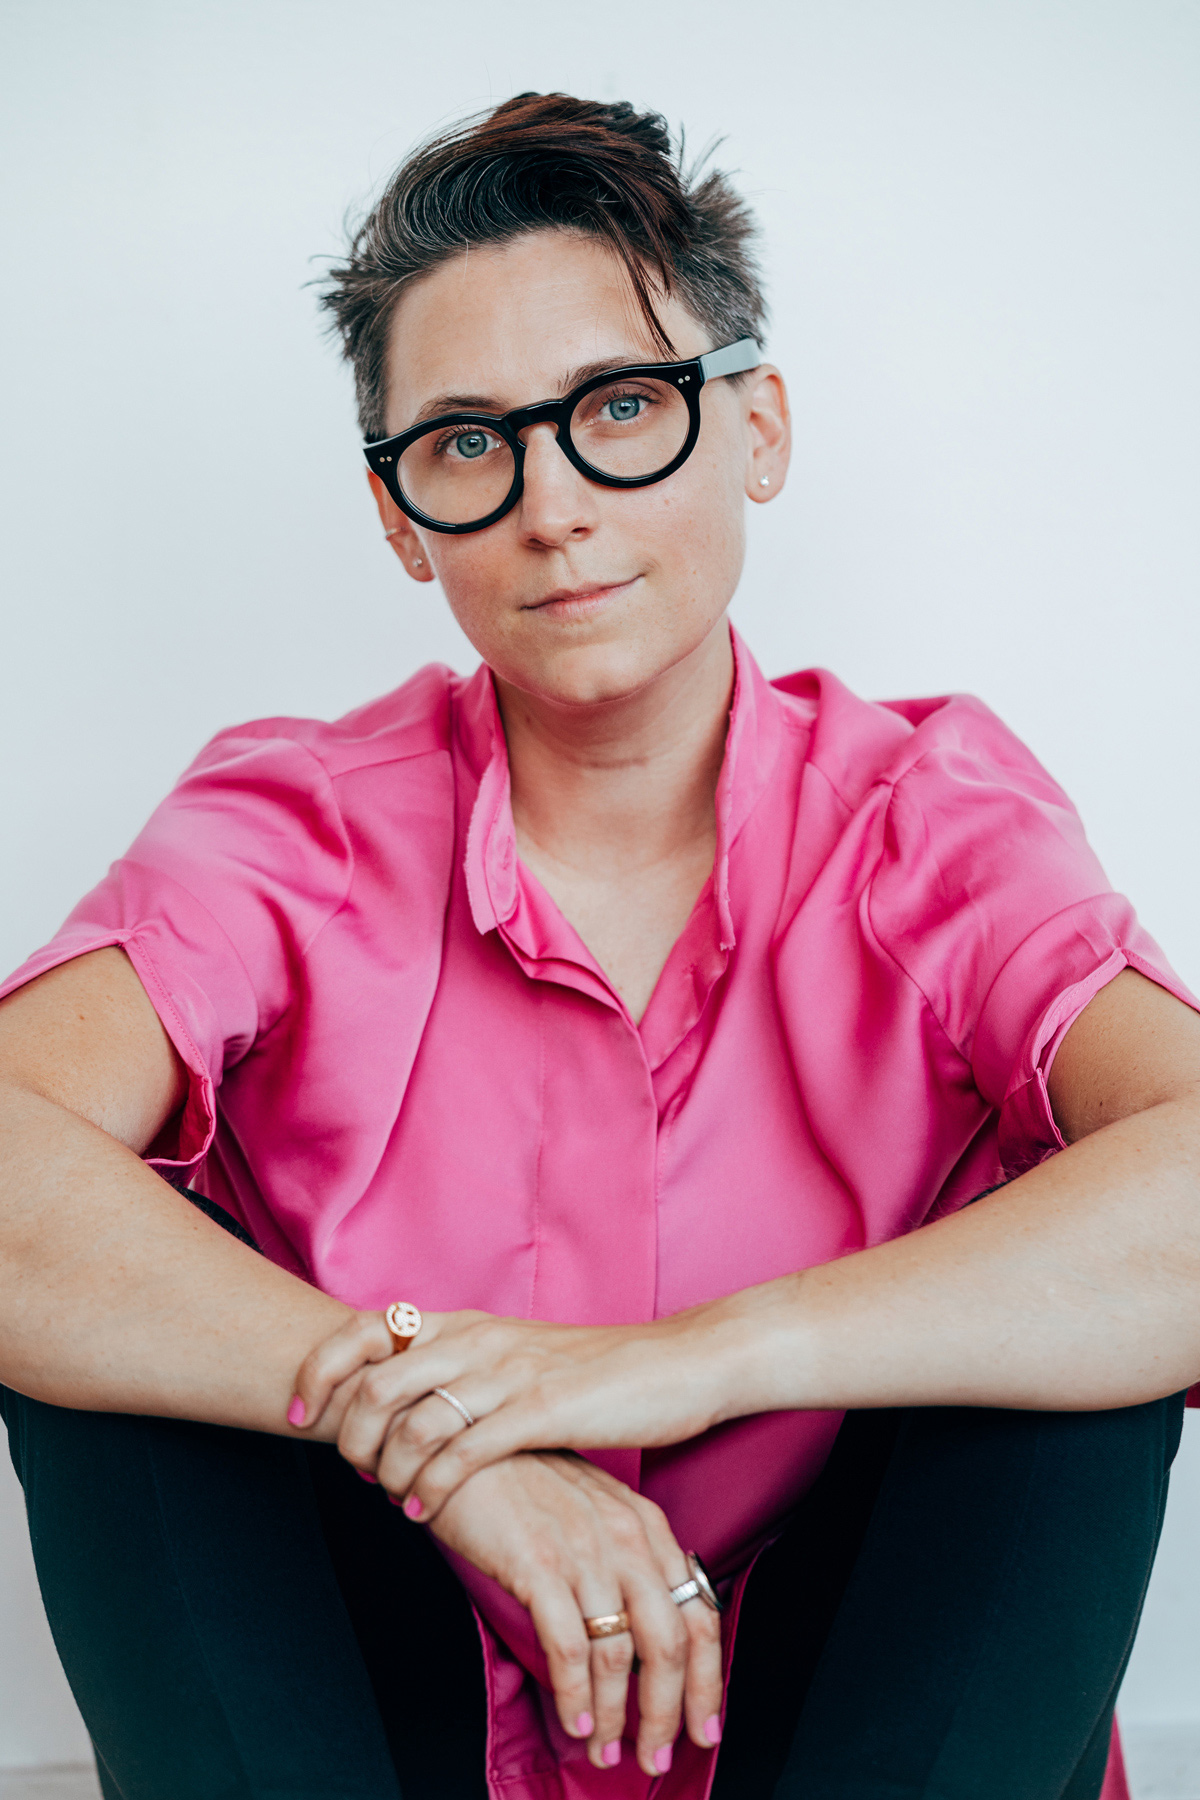 Liss LaFleur, sitting, arms crossed, wearing a bright pink shirt, black glasses